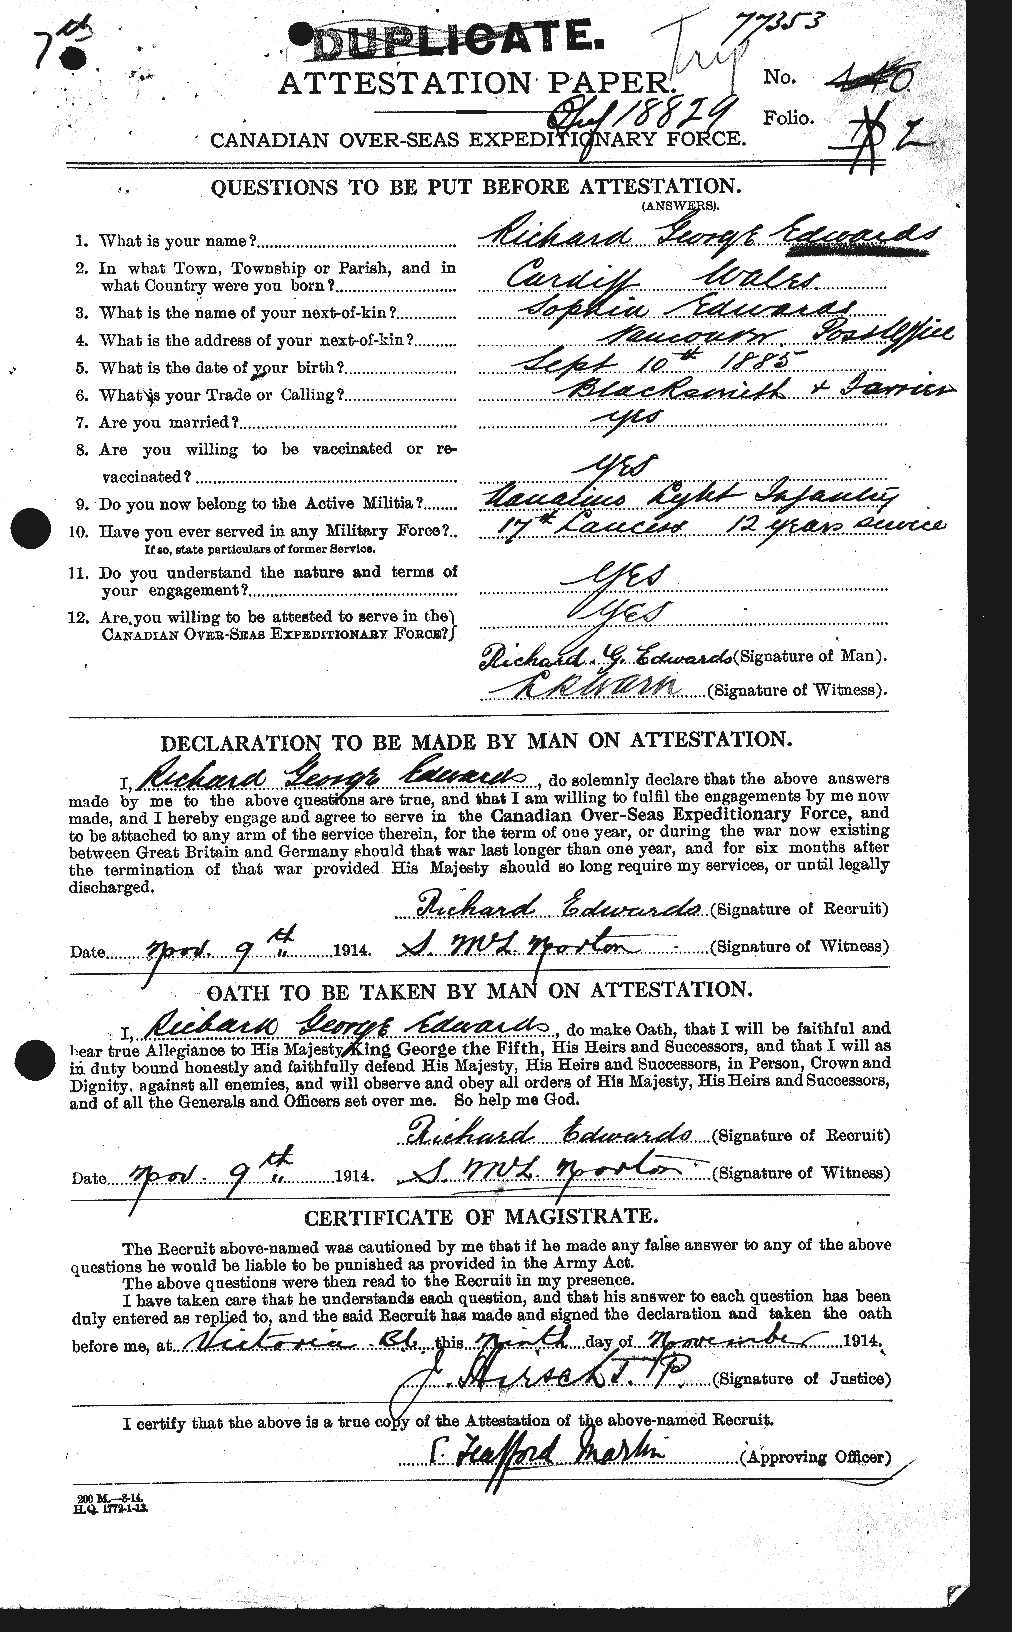 Personnel Records of the First World War - CEF 310261a